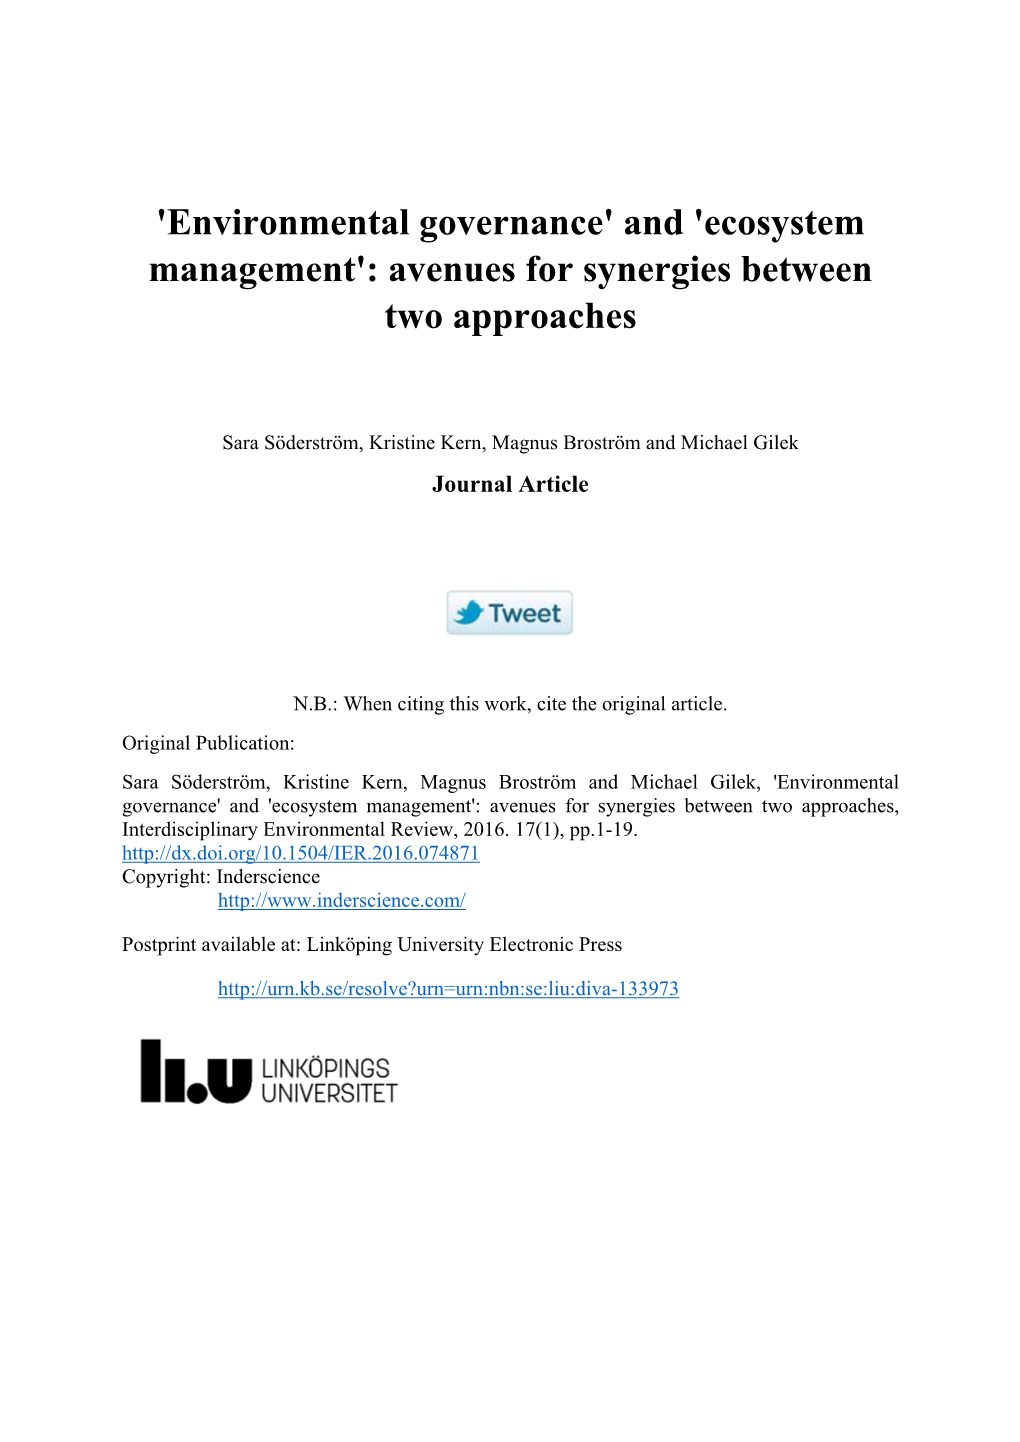 'Environmental Governance' and 'Ecosystem Management': Avenues for Synergies Between Two Approaches